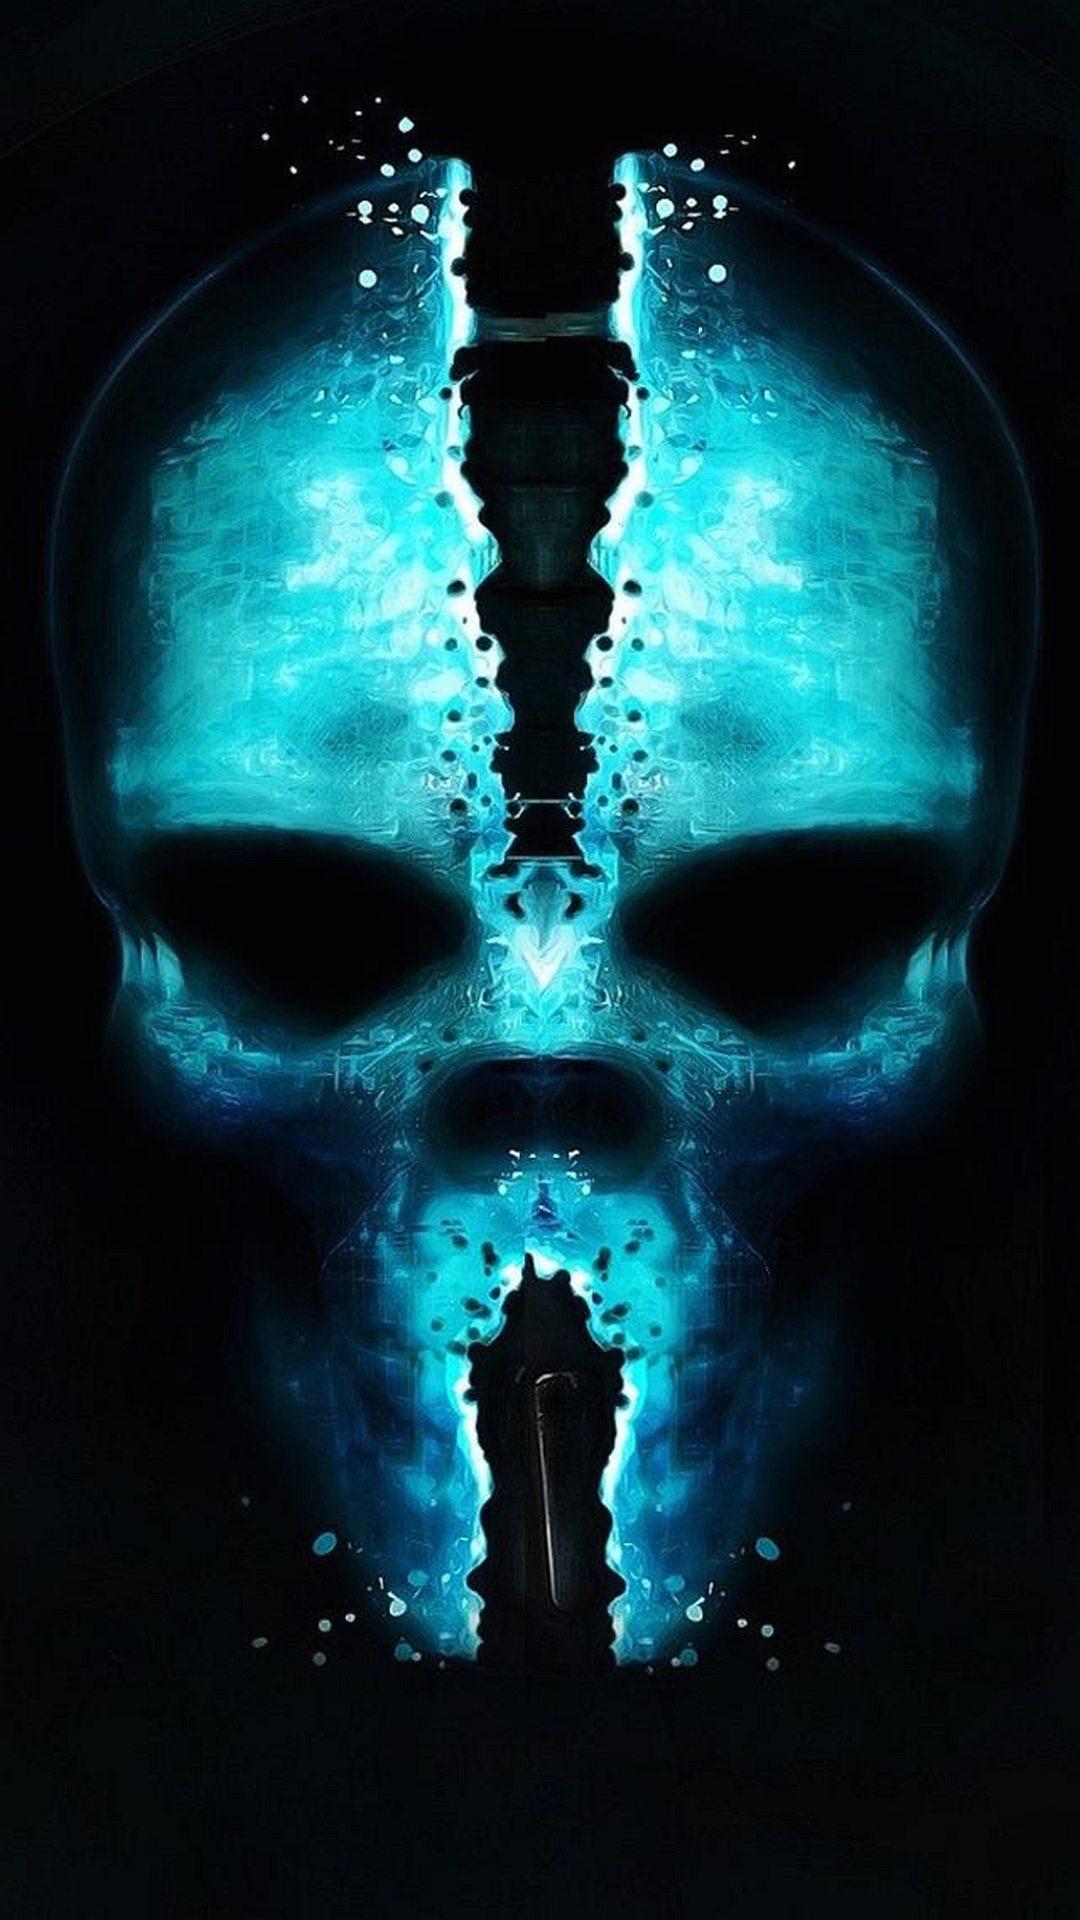 1080 x 1920 · jpeg - Skull artwork | 4K wallpapers, free and easy to download